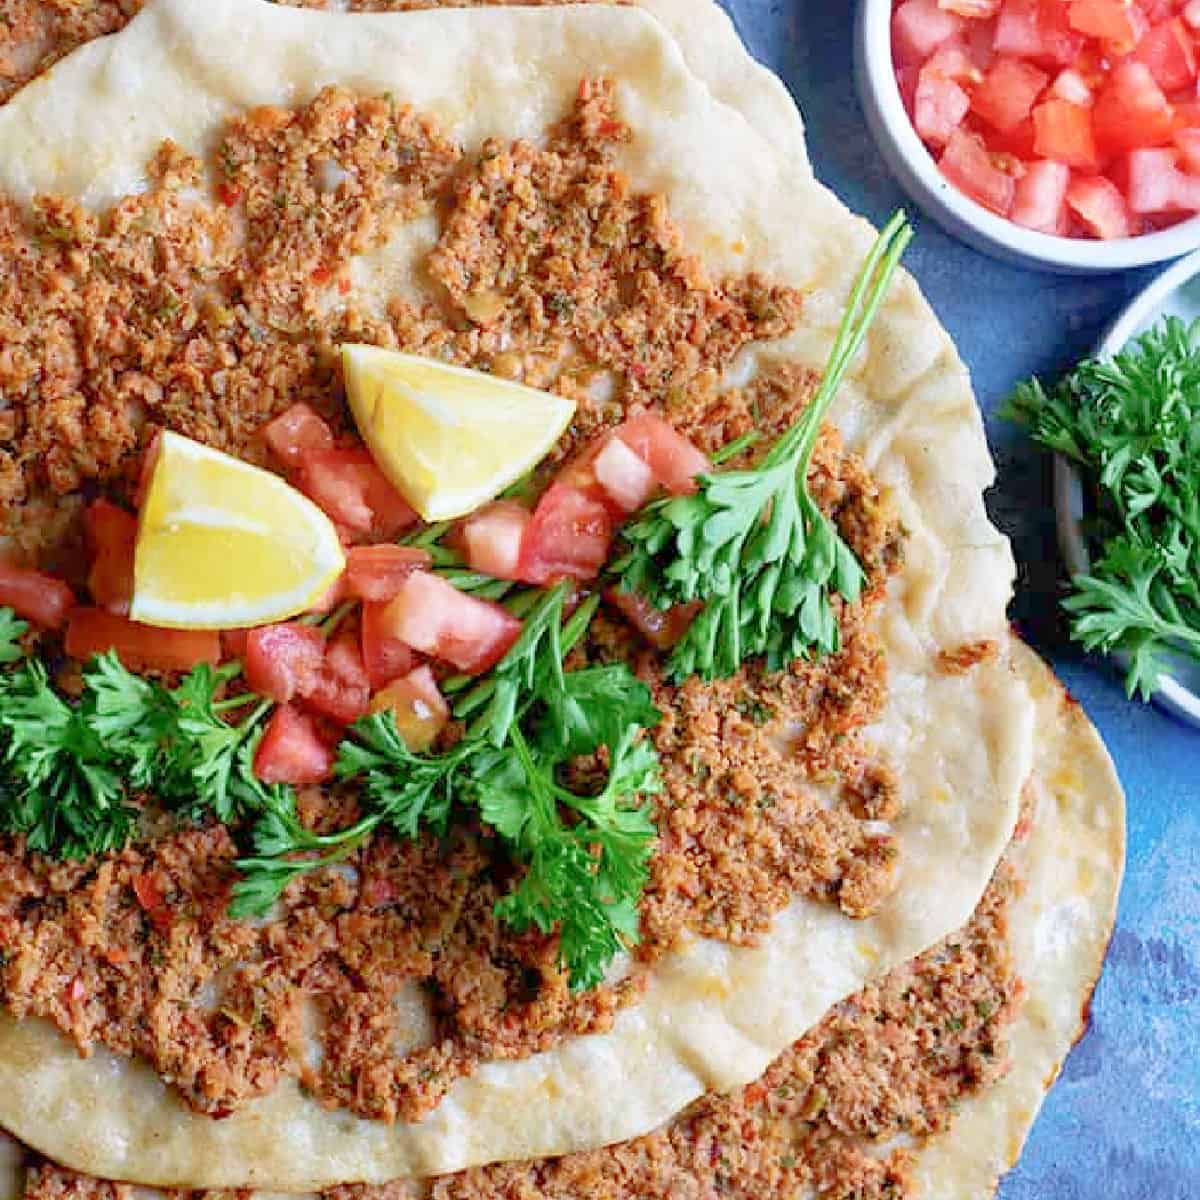 Lahmacun is thin and crispy flatbread bursting with flavor. Topped with meat, parsley, peppers, tomatoes and a mixture of delicious spices, this Turkish pizza is a must-try! 
